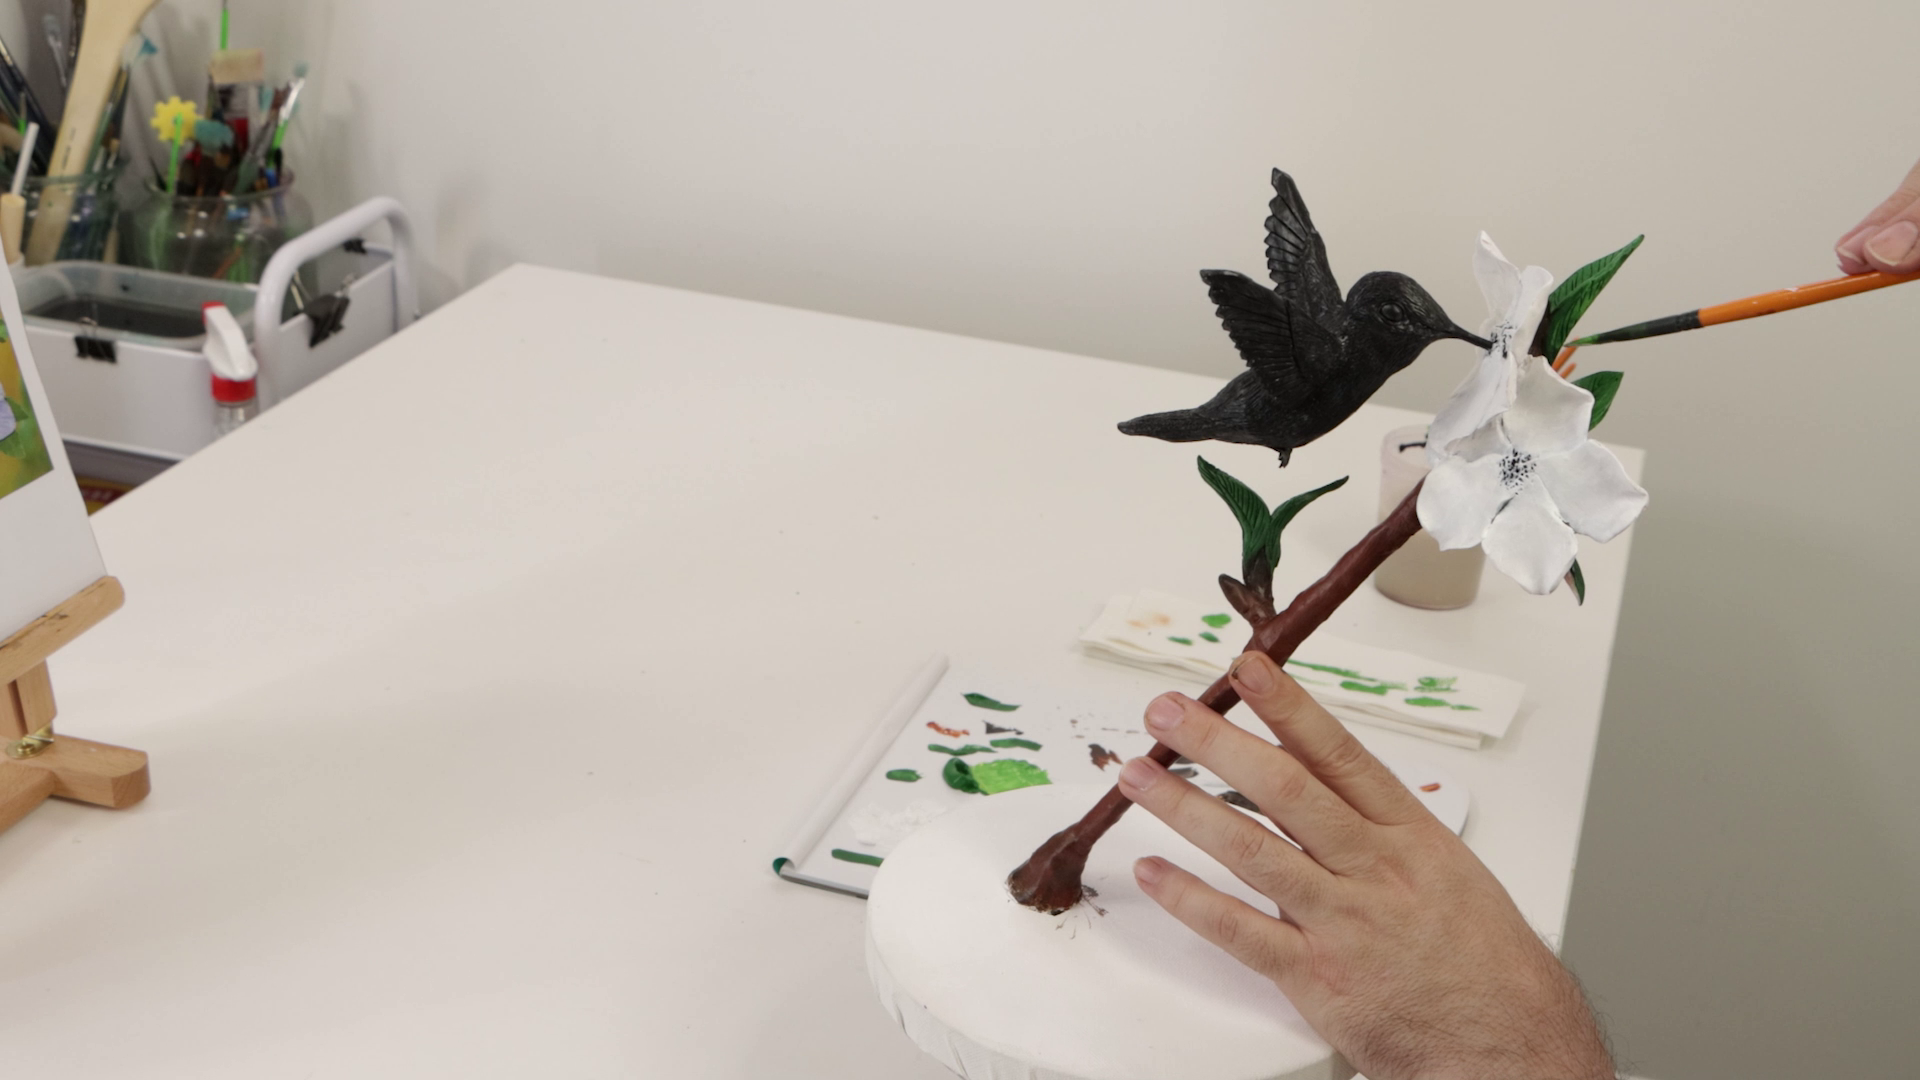 Hummingbird and flower branch sculpture leaves and branch being painted